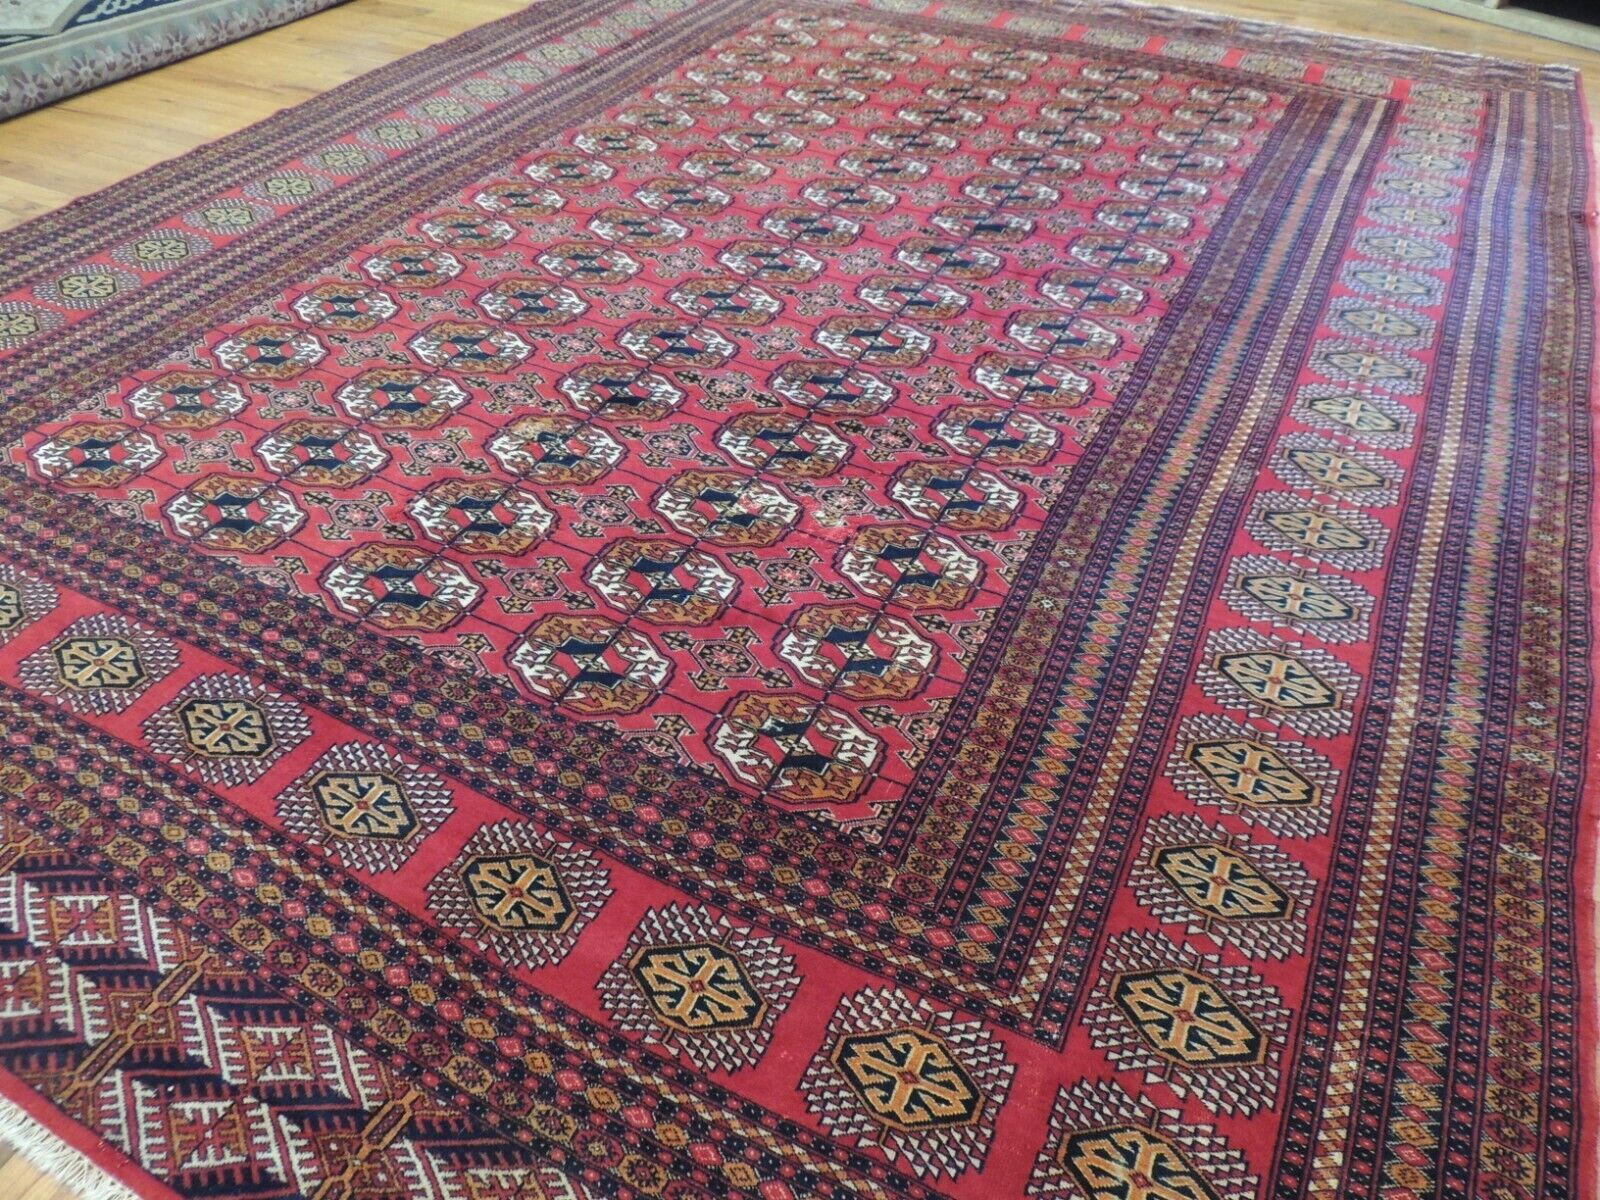 9x12 Antique Pakistani Bokara Bokhara wool hand-knotted Oriental Area Rug Red 